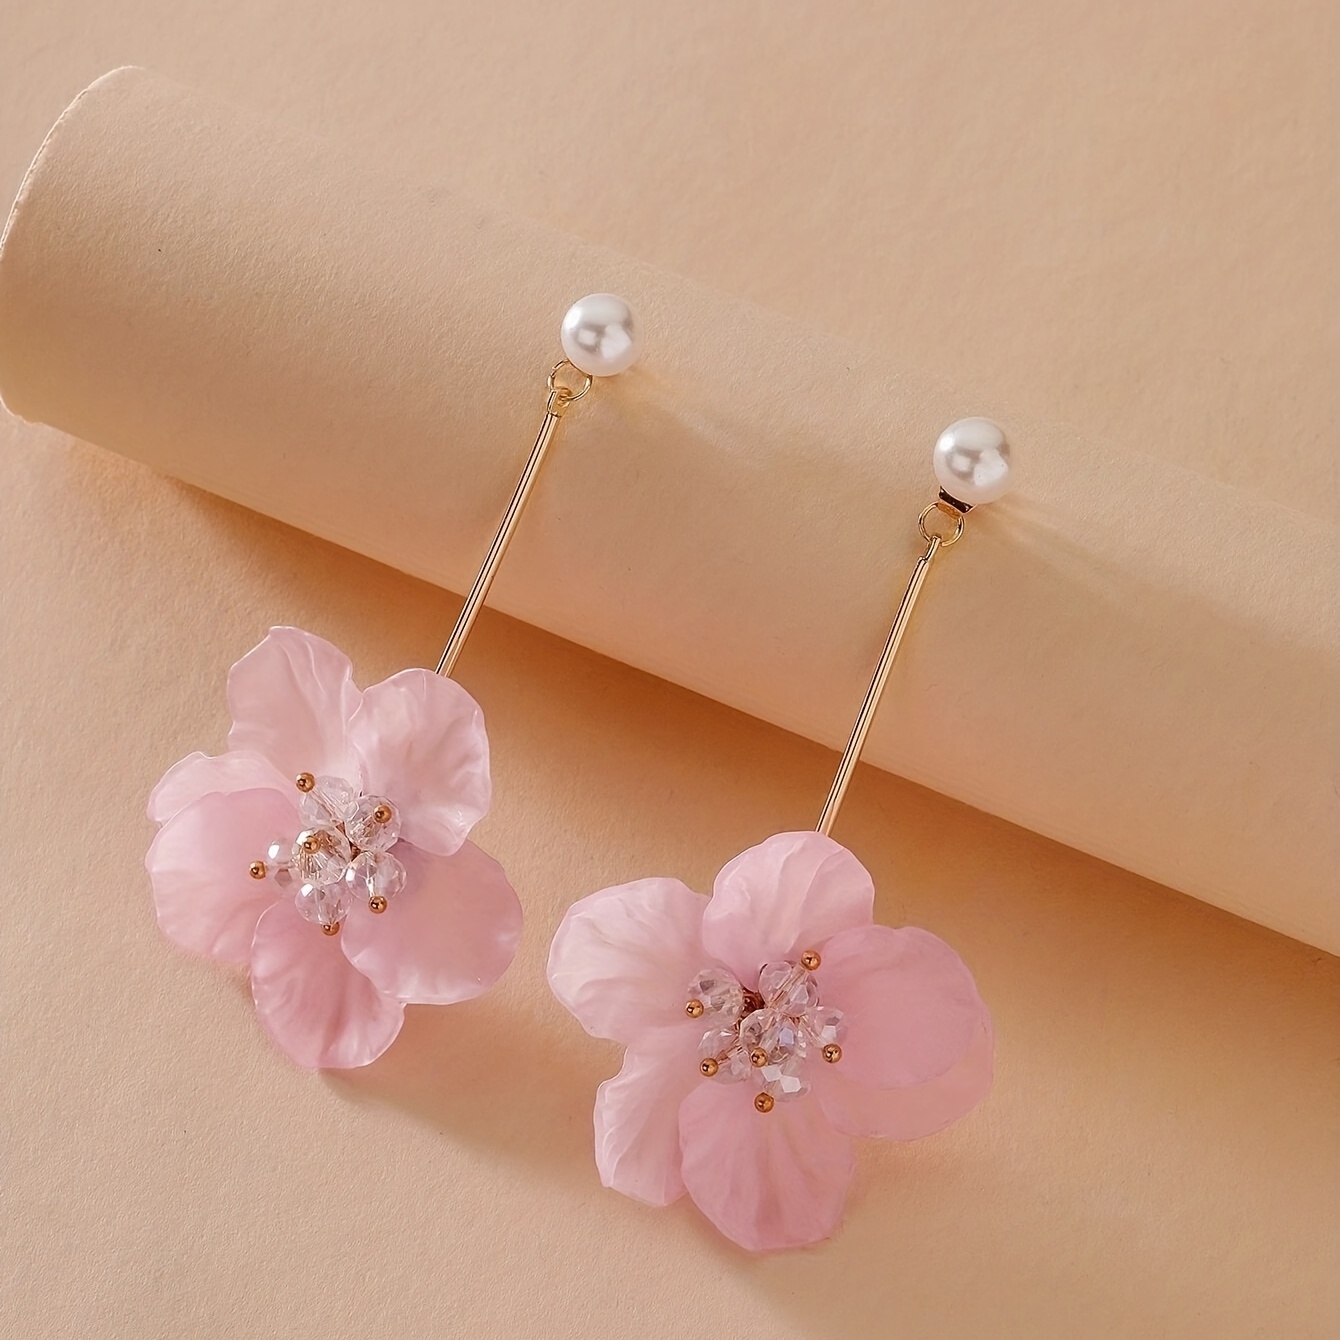 

Pink/ White Exquisite Fabric Flower Design Dangle Earrings Retro Vacation Style Alloy Jewelry Holiday Ear Jewelry